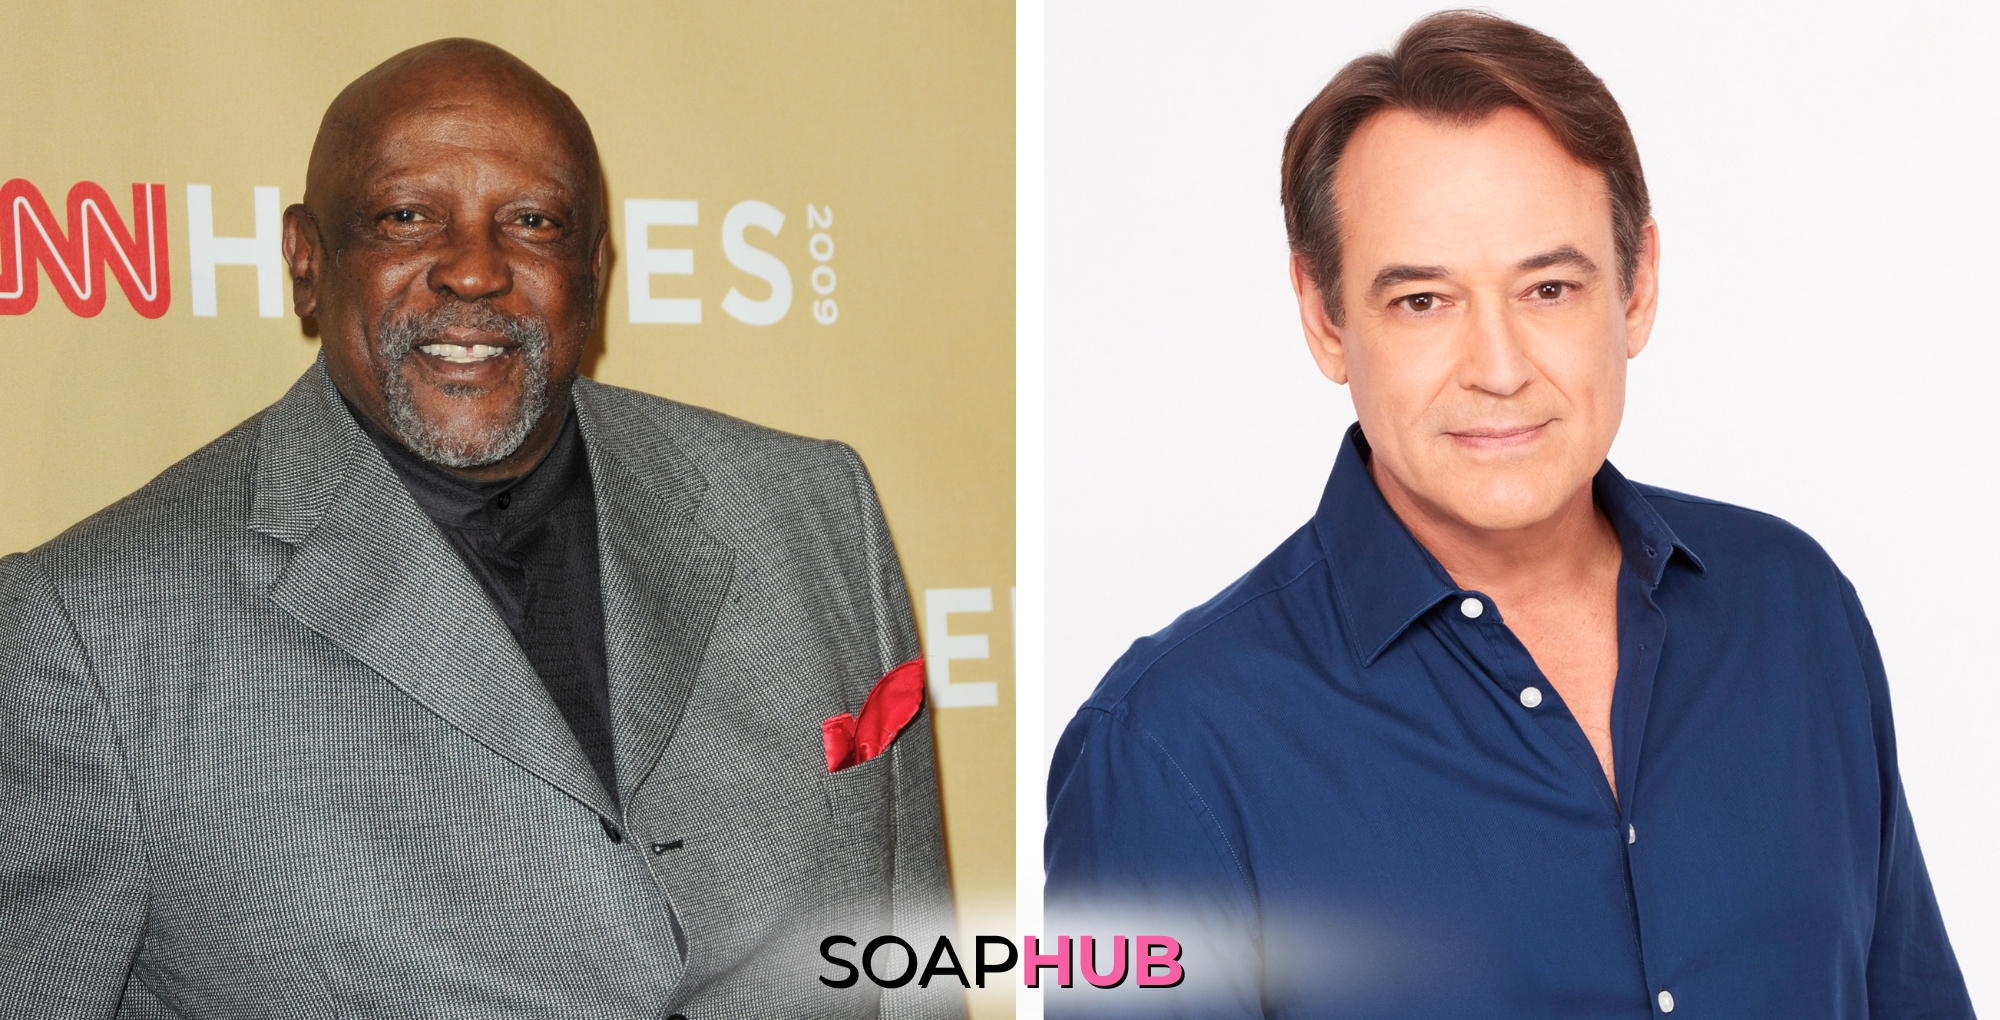 GH Jon Lindstrom and the late Louis Gossett Jr. with the Soap Hub logo across the bottom.